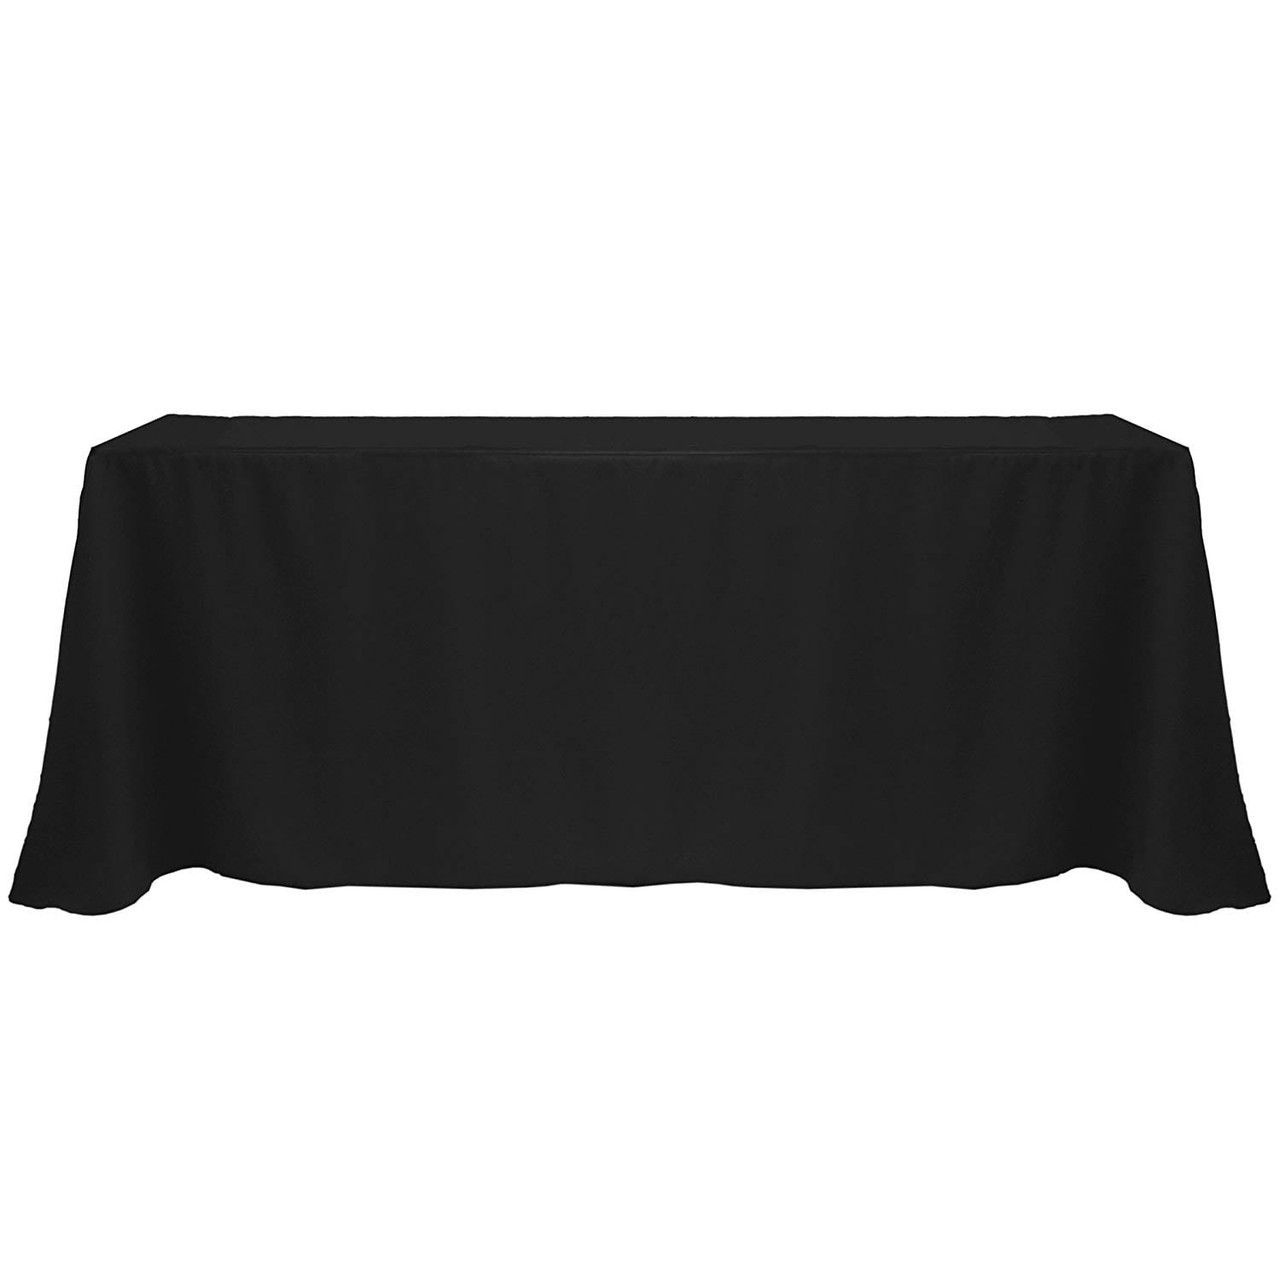 blabk rectangle table cover